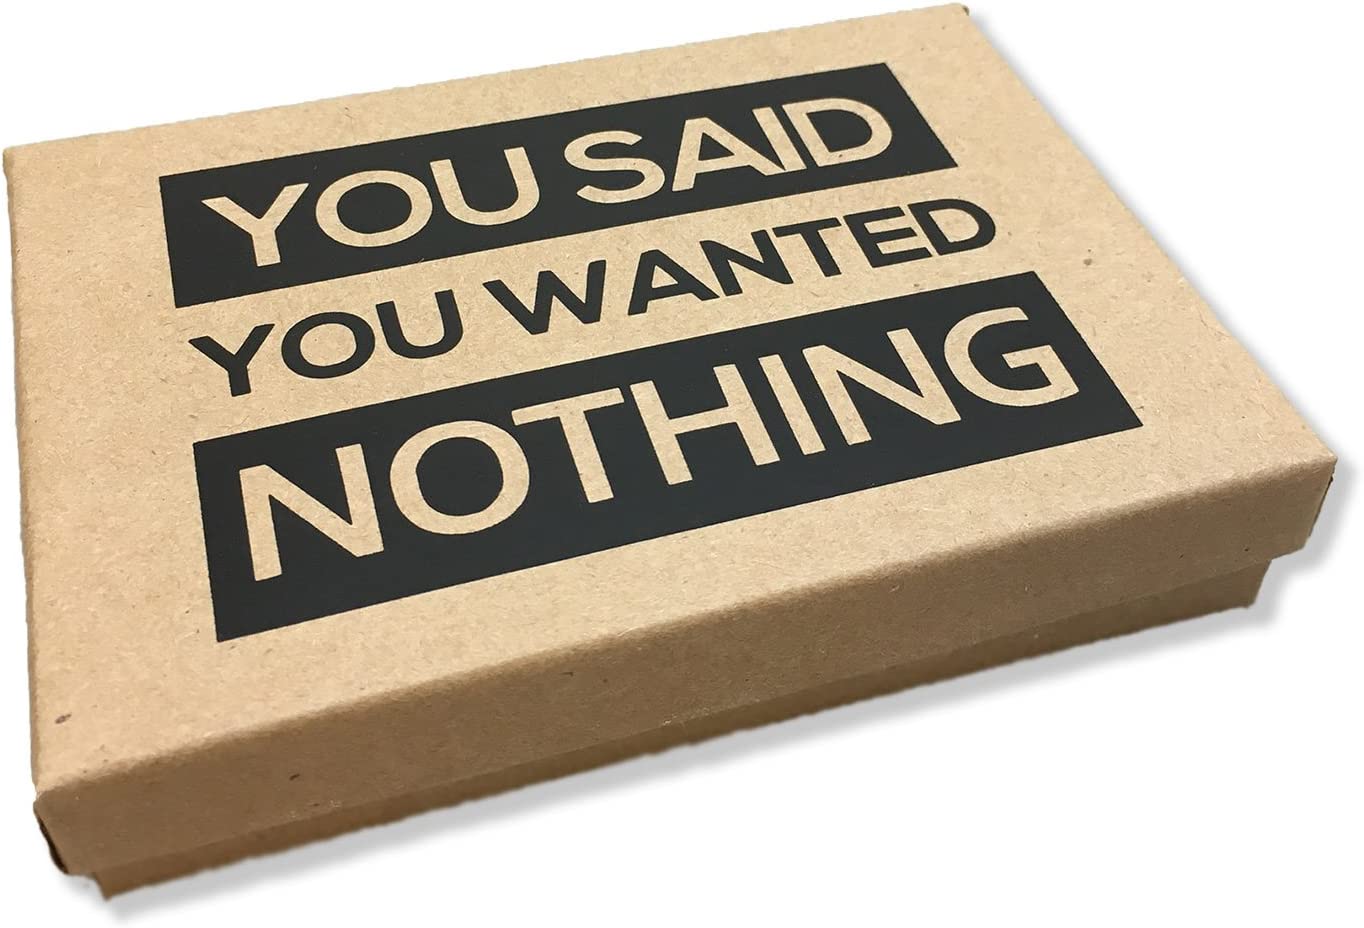 A brown cardboard box which has text on the lid which says, 'You said you wanted nothing.'